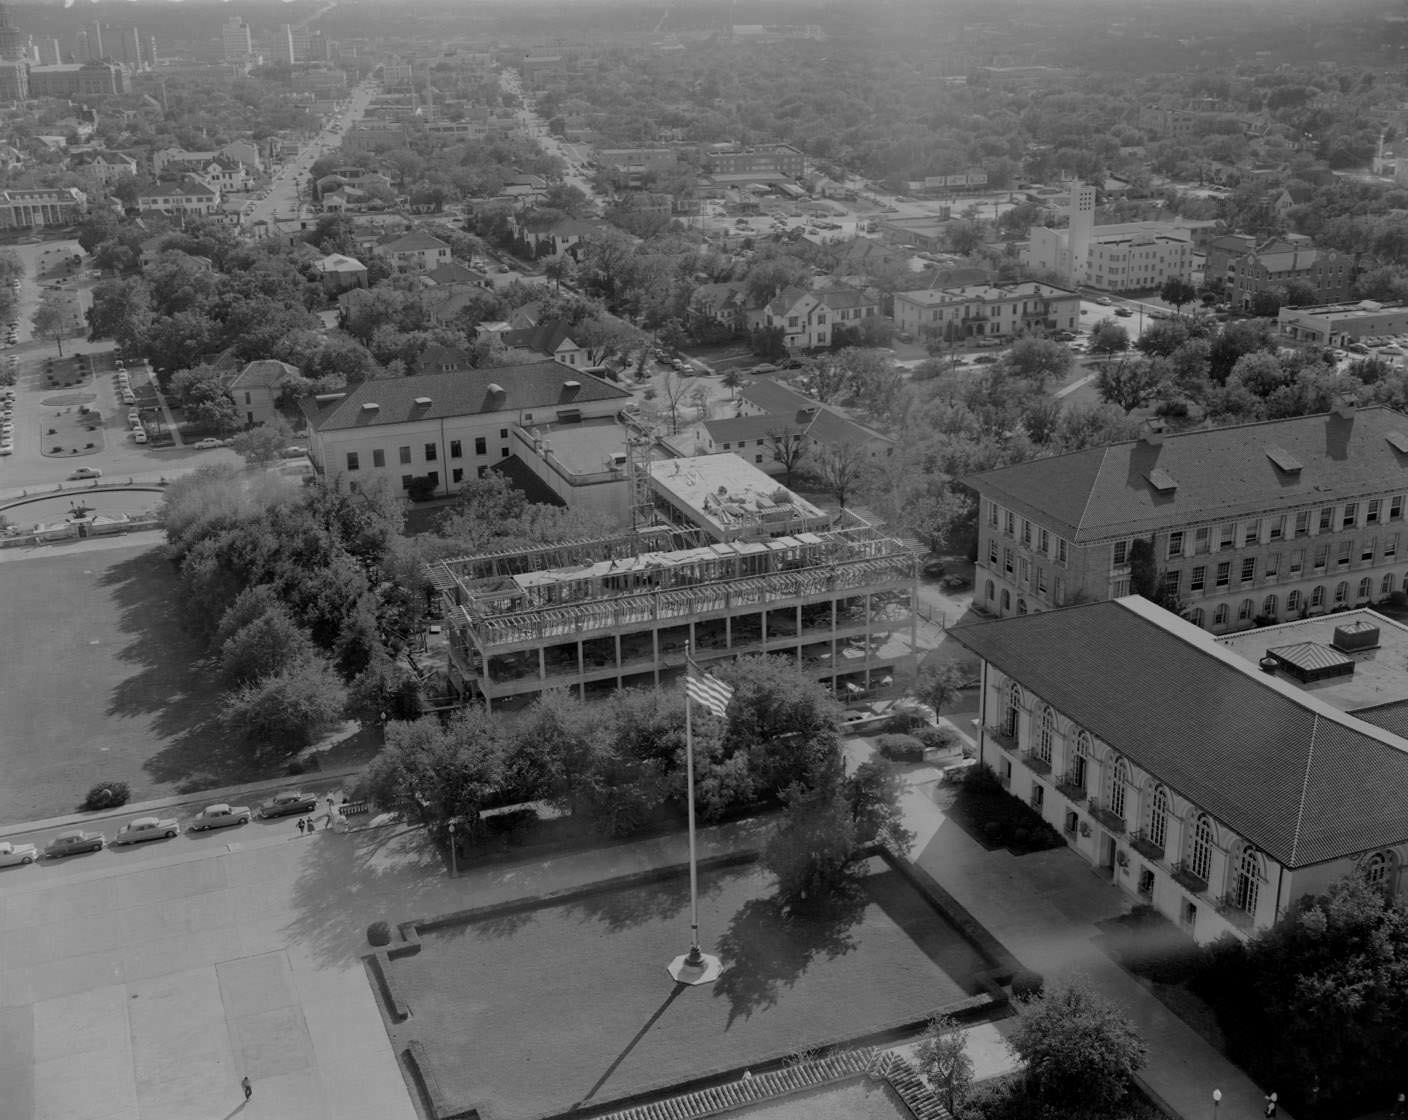 An aerial view of construction at the University of Texas, 1954